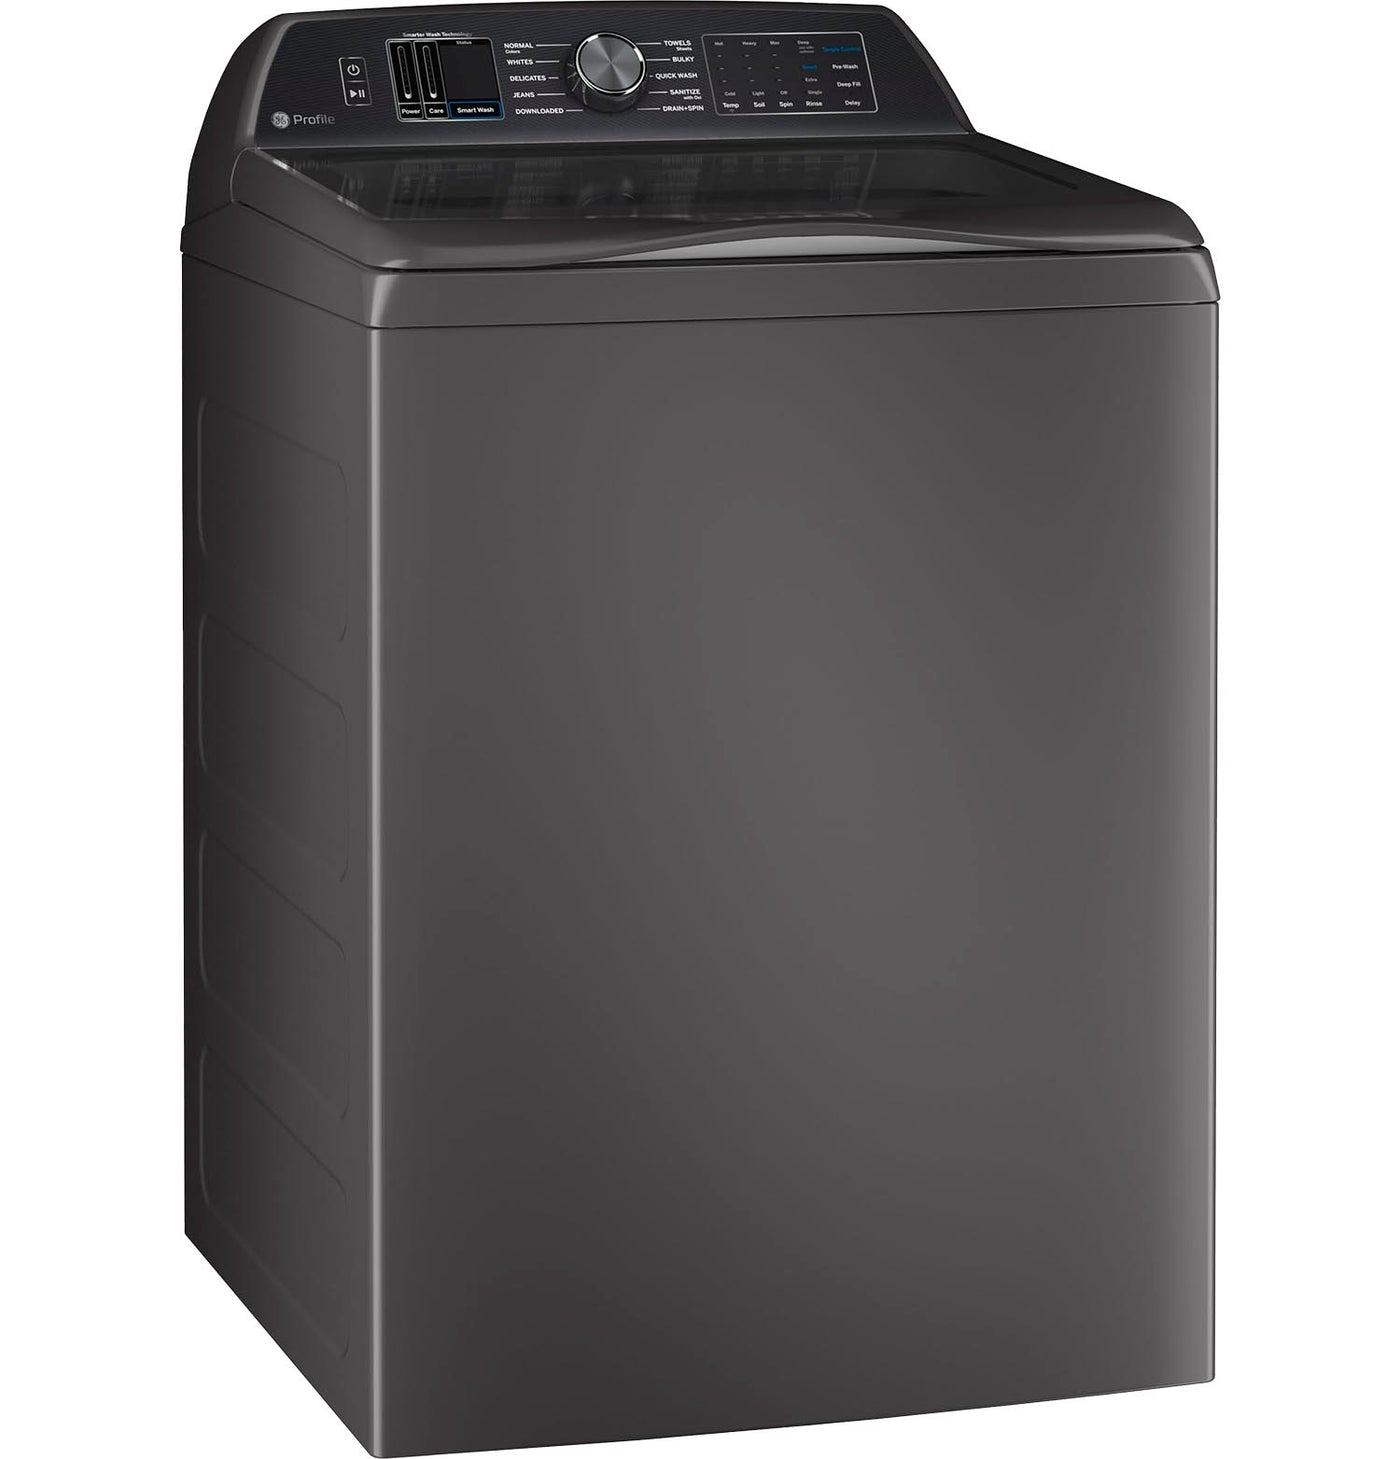 GE Profile Diamond Grey Top Load Washer with Smarter Wash Technology (6.2 Cu. Ft)- PTW700BPTDG